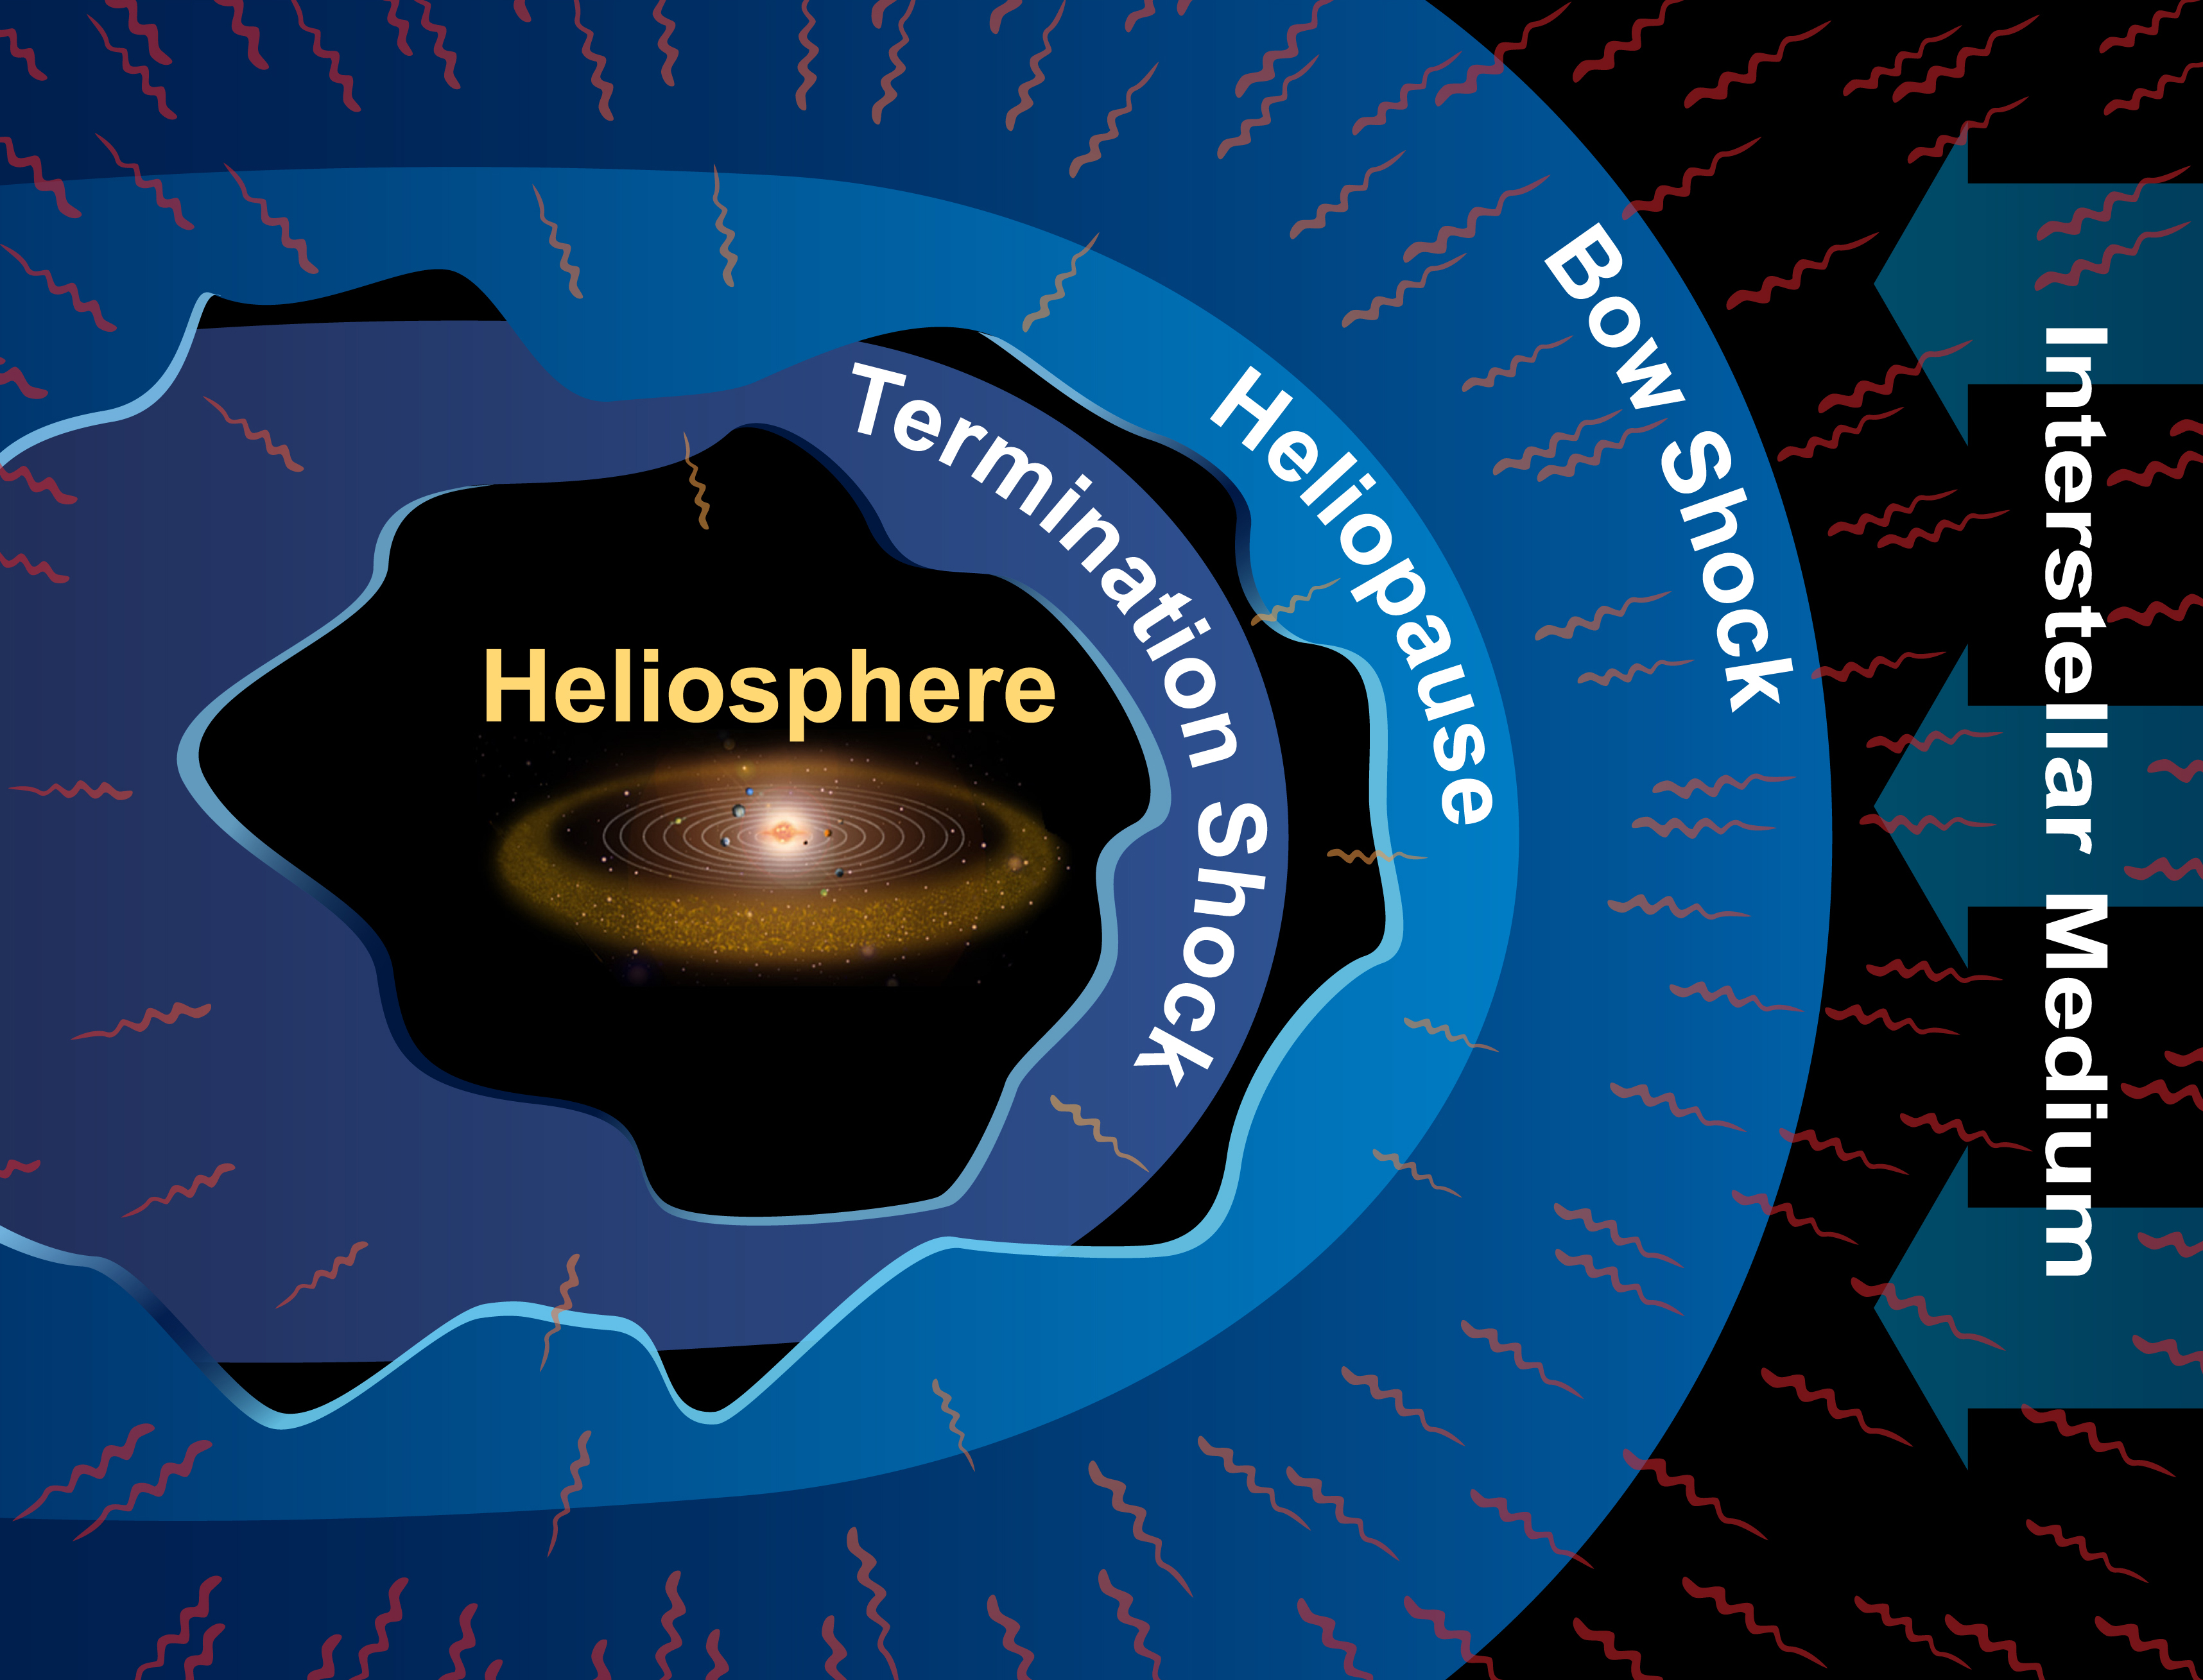 The heliosphere, in which the Sun and planets reside, is a large bubble inflated from the inside by the high-speed solar wind blowing out from the Sun. Pressure from the solar wind, along with pressure from the surrounding interstellar medium, determines the size and shape of the heliosphere. The supersonic flow of solar wind abruptly slows at the termination shock, the innermost boundary of the solar system. The edge of the solar system is the heliopause. The bow shock pushes ahead through the interstellar medium as the heliosphere plows through the galaxy. 